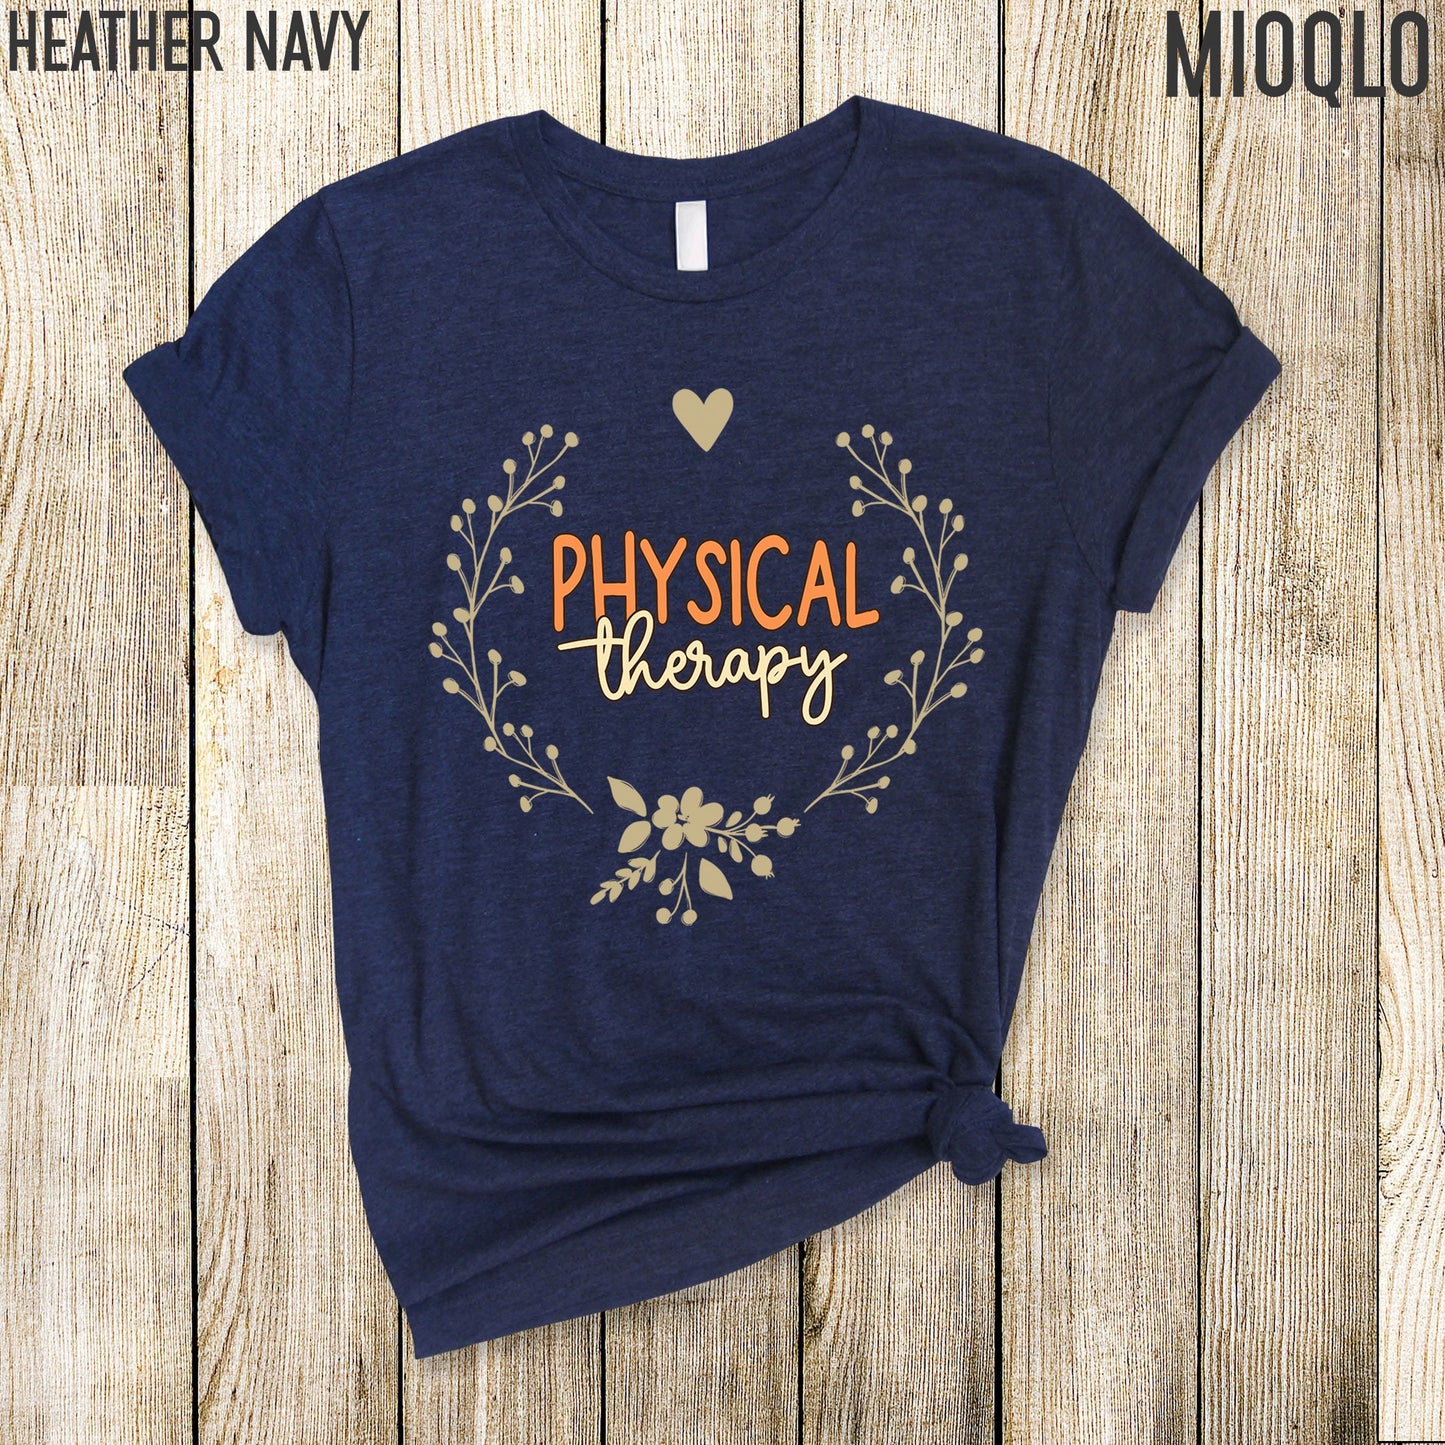 Physical Therapy Shirt, Physical Therapy Gifts, Pediatric Physical Therapy Shirt, PTA Gift, PT Gift, Physical Therapist Assistant, PTA Shirt